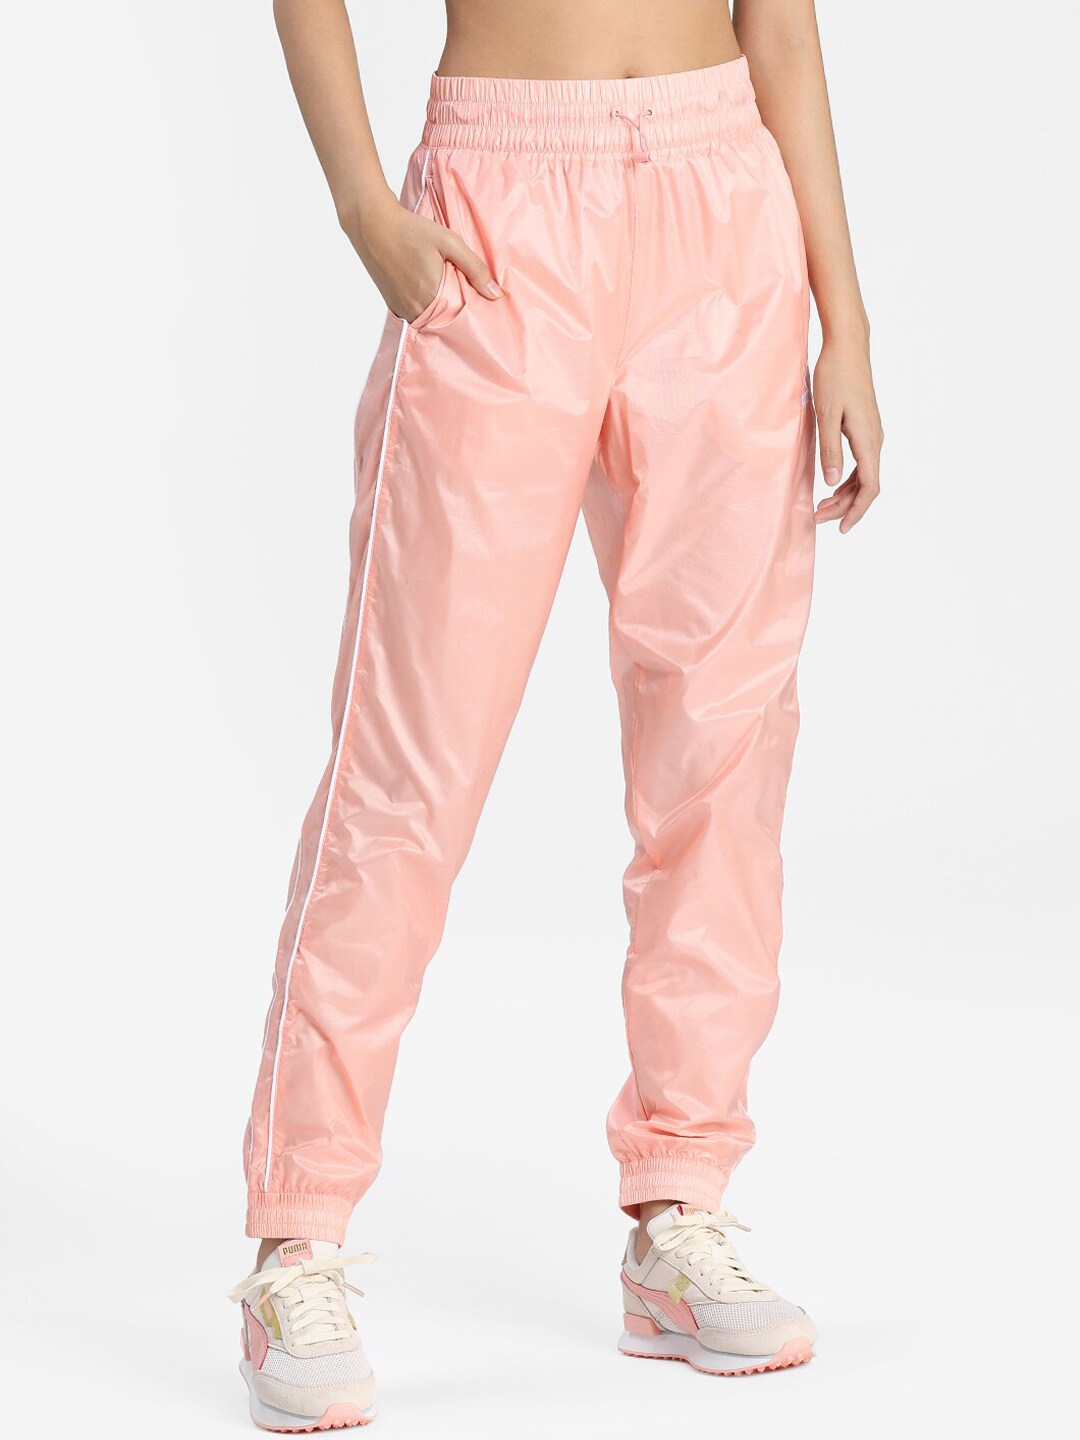 Puma Women Peach-Coloured Solid Iconic T7 Regular Fit Joggers Price in India